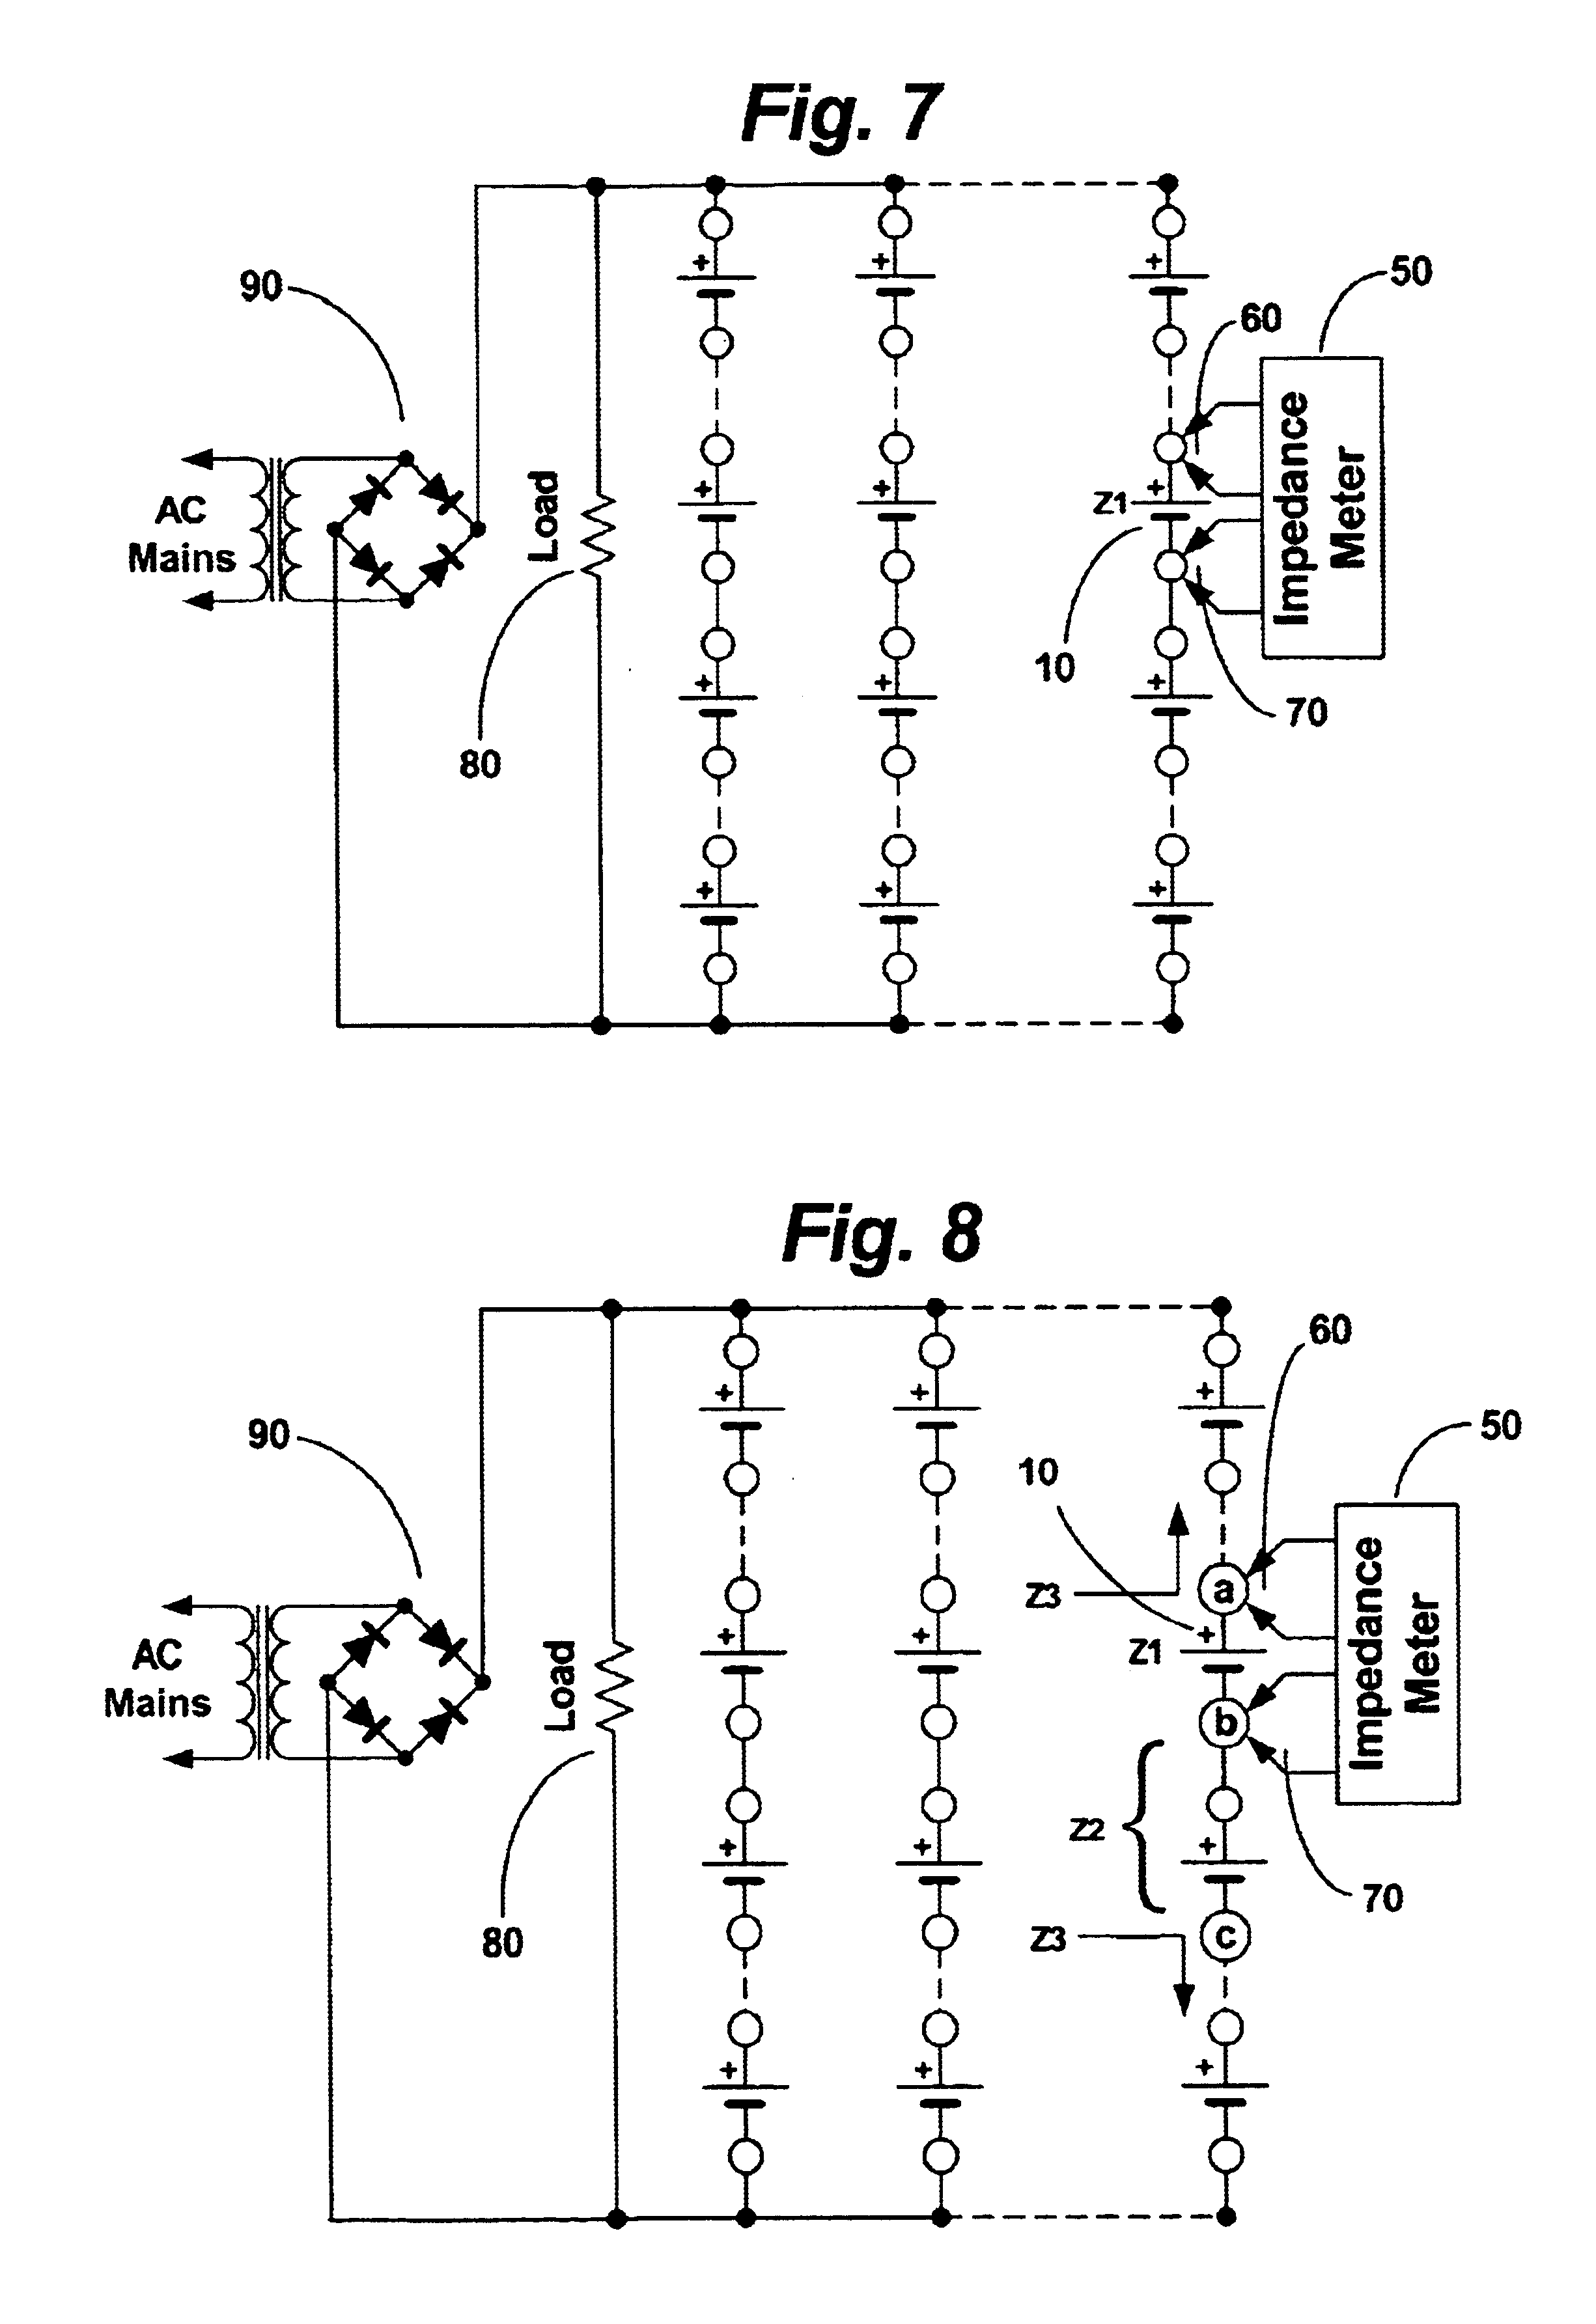 Method and apparatus for testing cells and batteries embedded in series/parallel systems